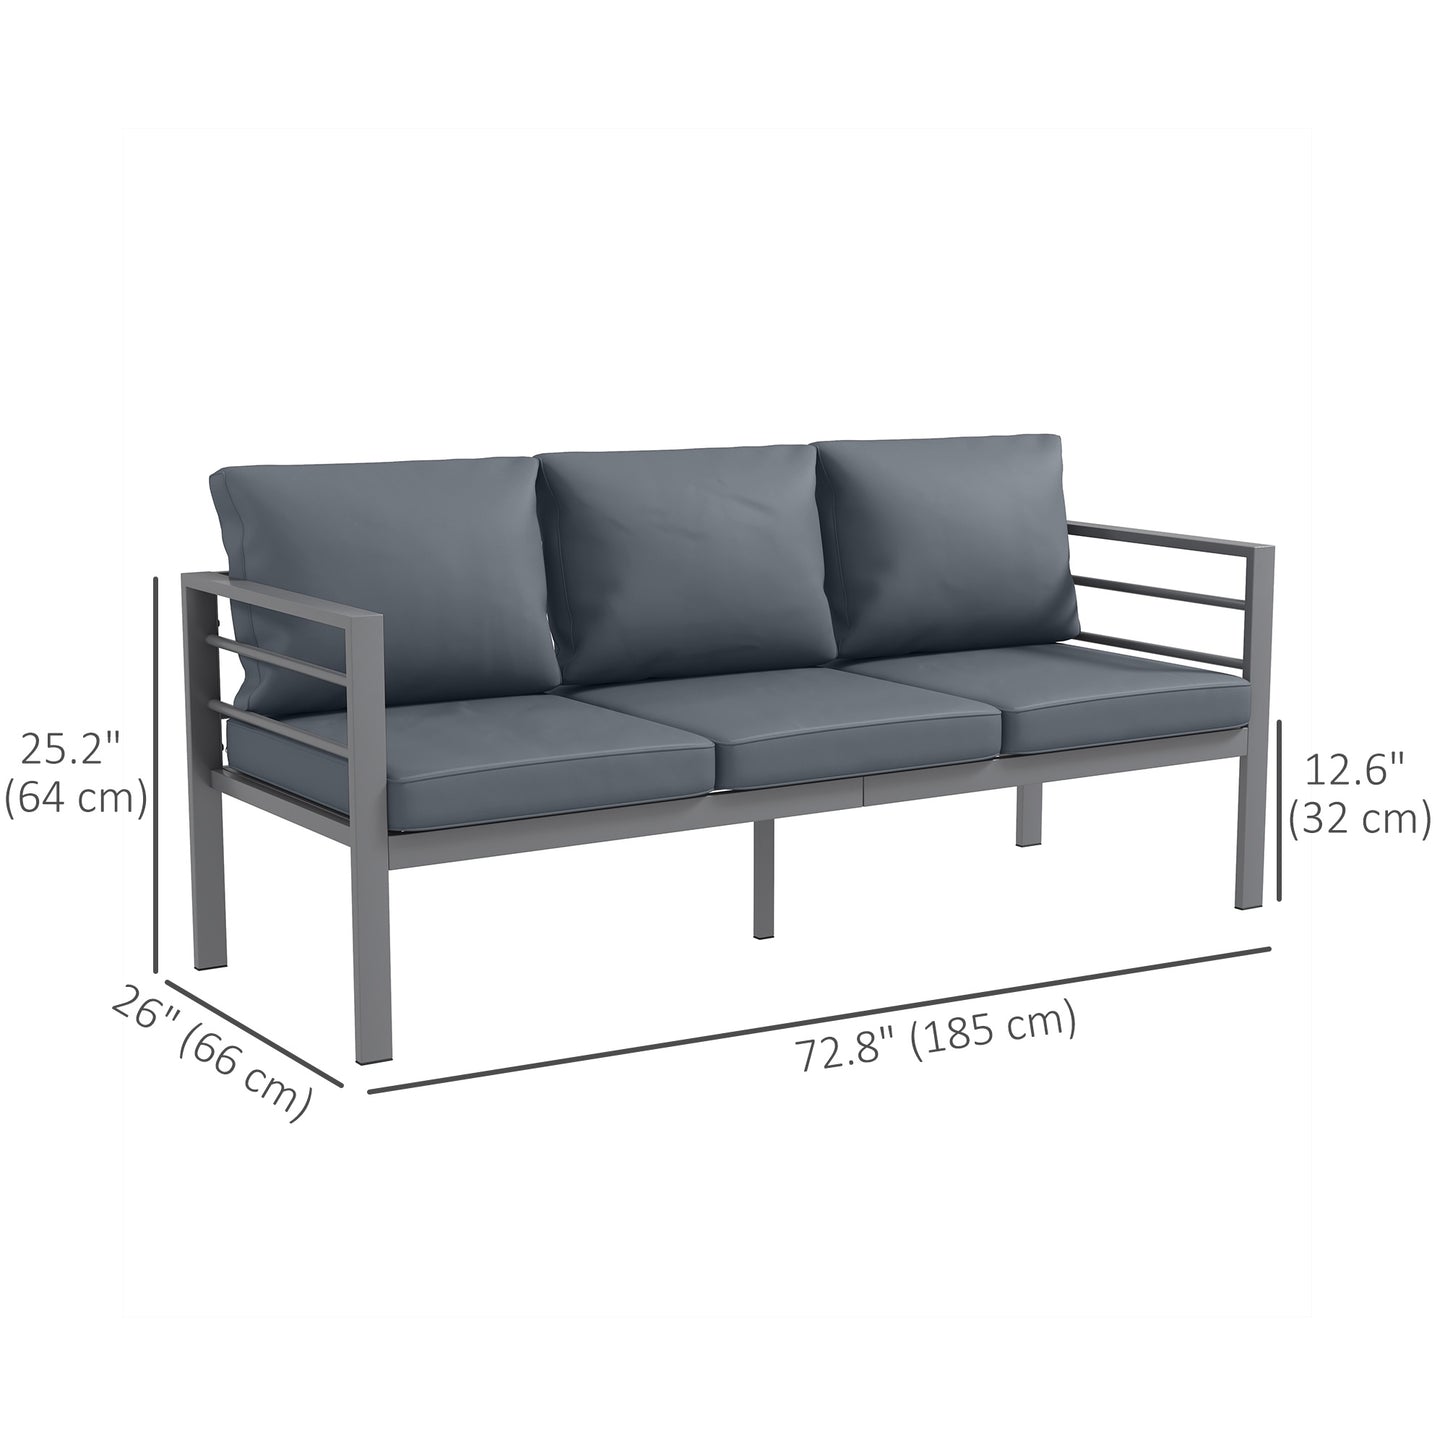 Outsunny Aluminum Garden Sofa, 3-Person Outdoor Couch, Backyard Furniture for 3-person with Cushions, 72.8" x 26" x 25.2", Grey